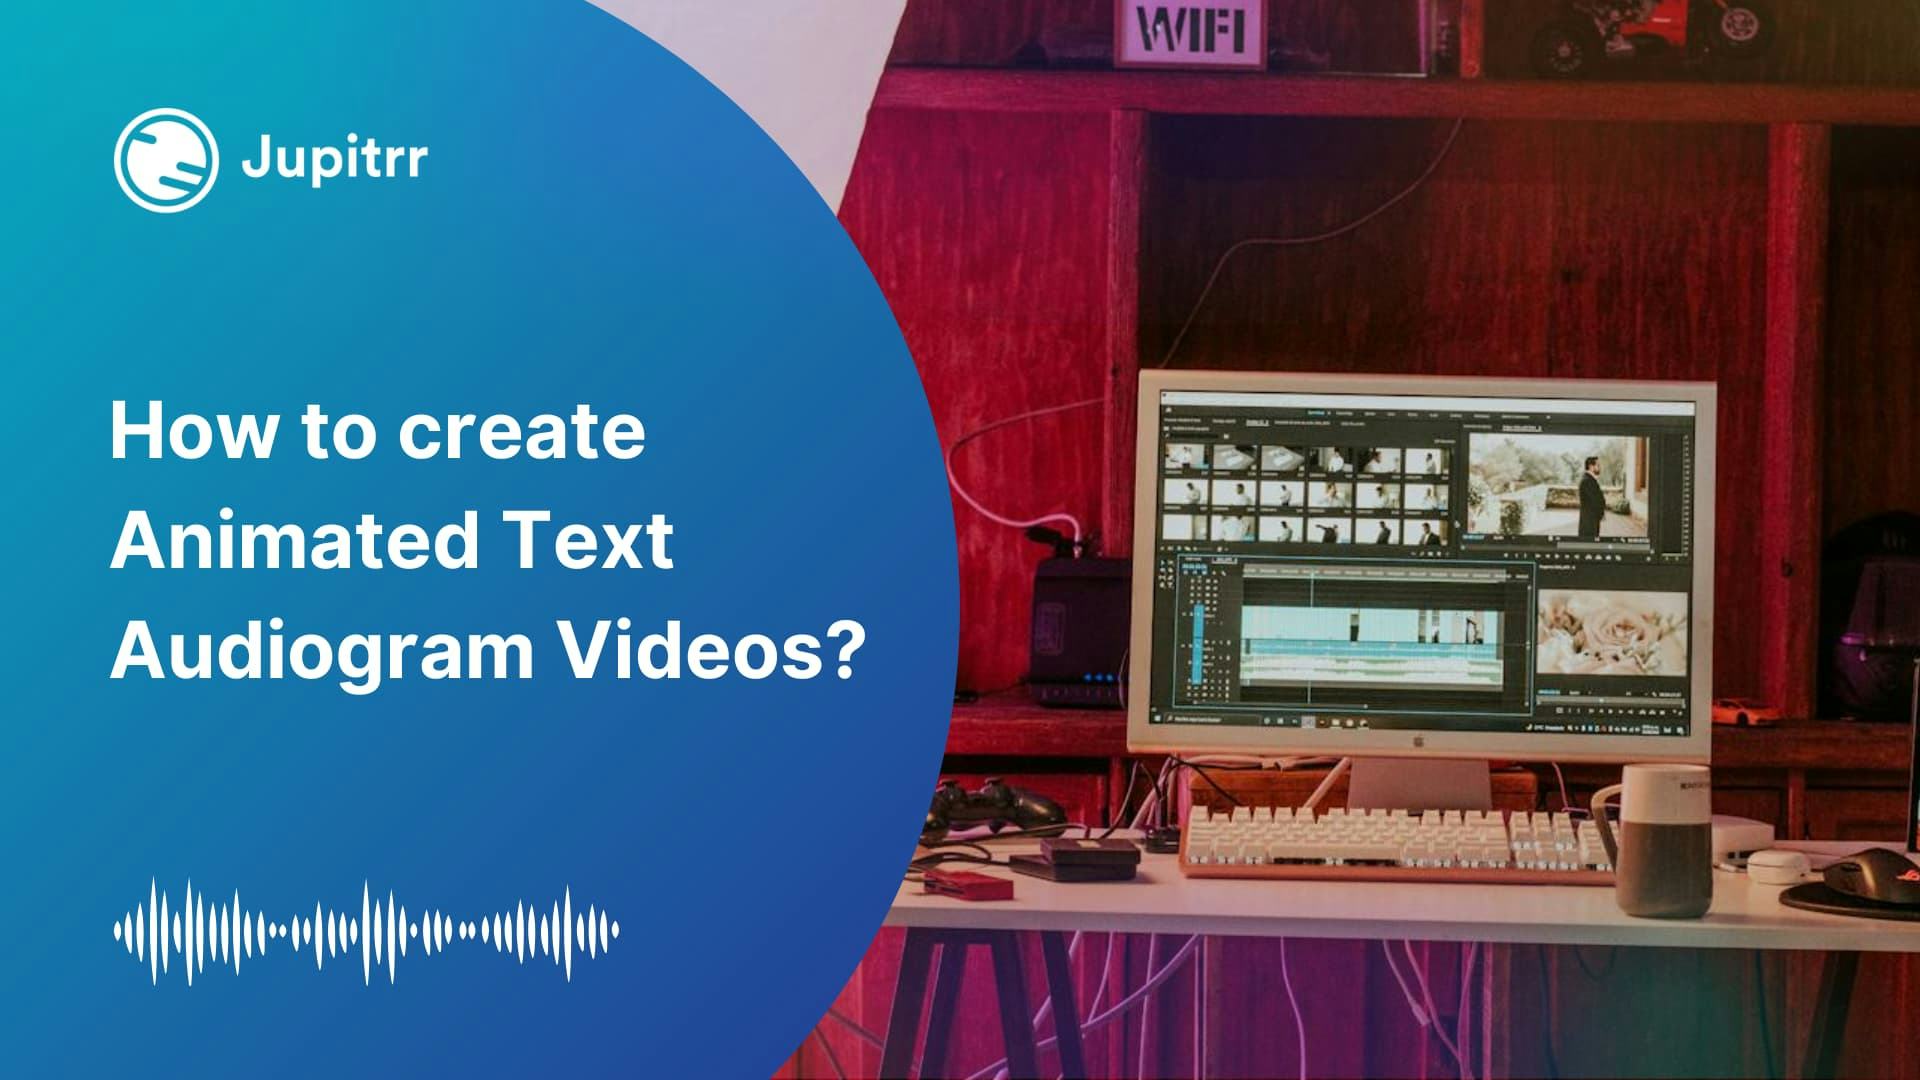 How to create Animated Text Audiogram Videos?